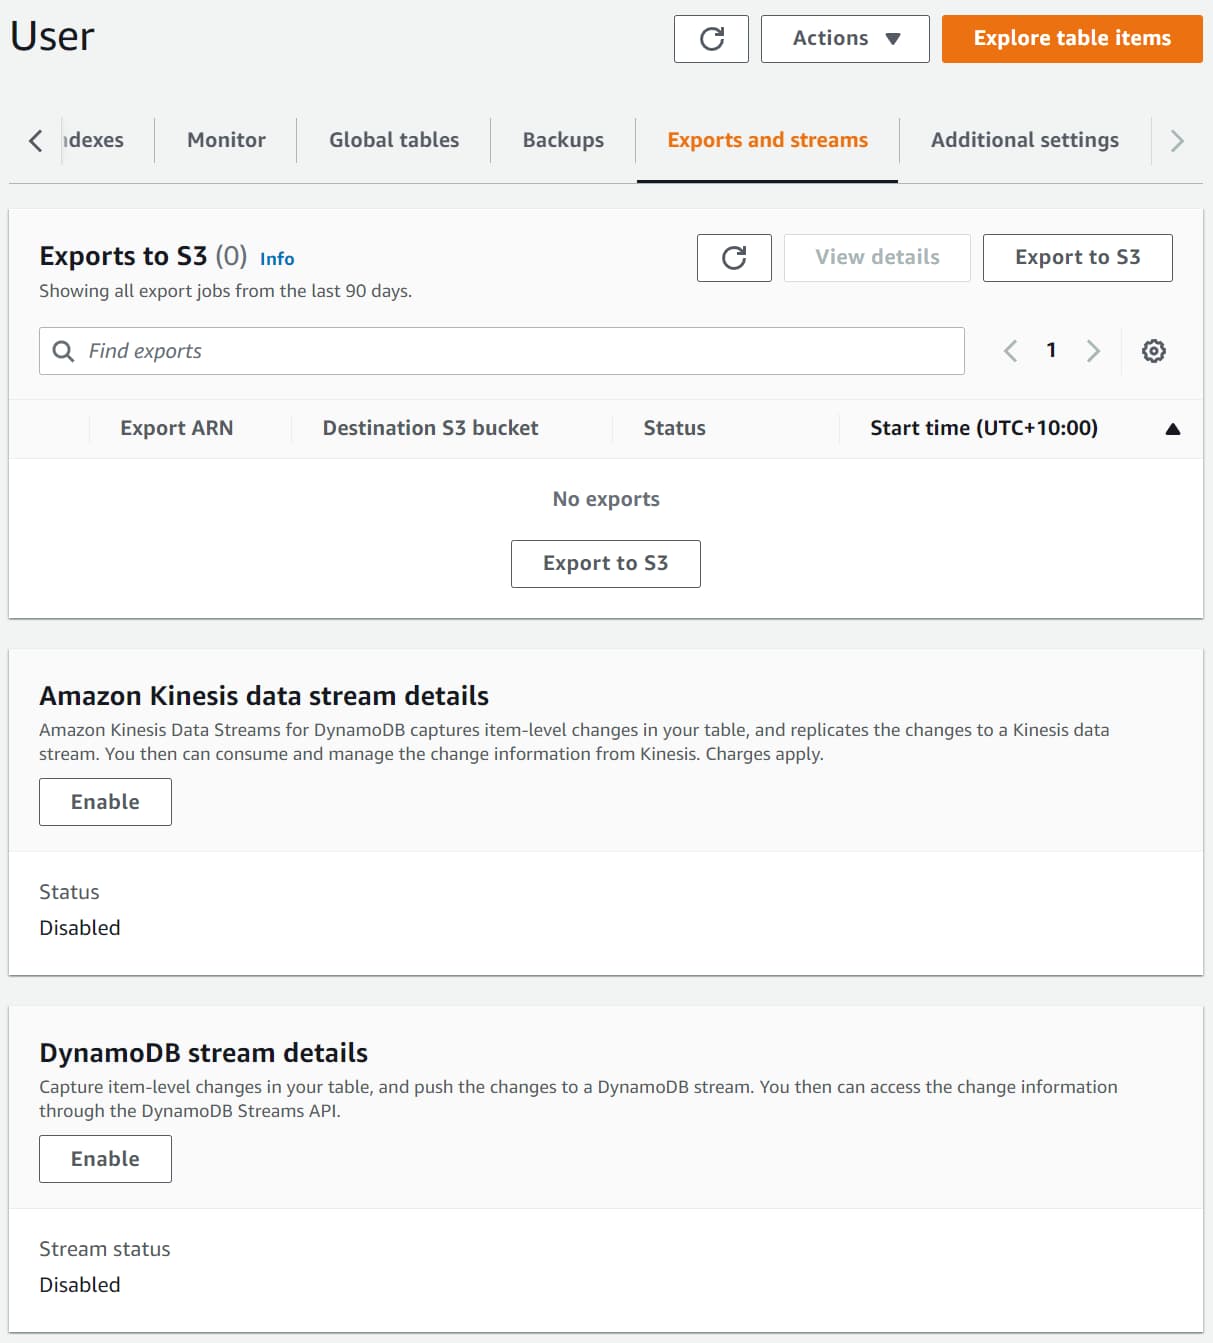 Enable DynamoDB Stream on a Table under the Exports and streams section in the AWS Console.